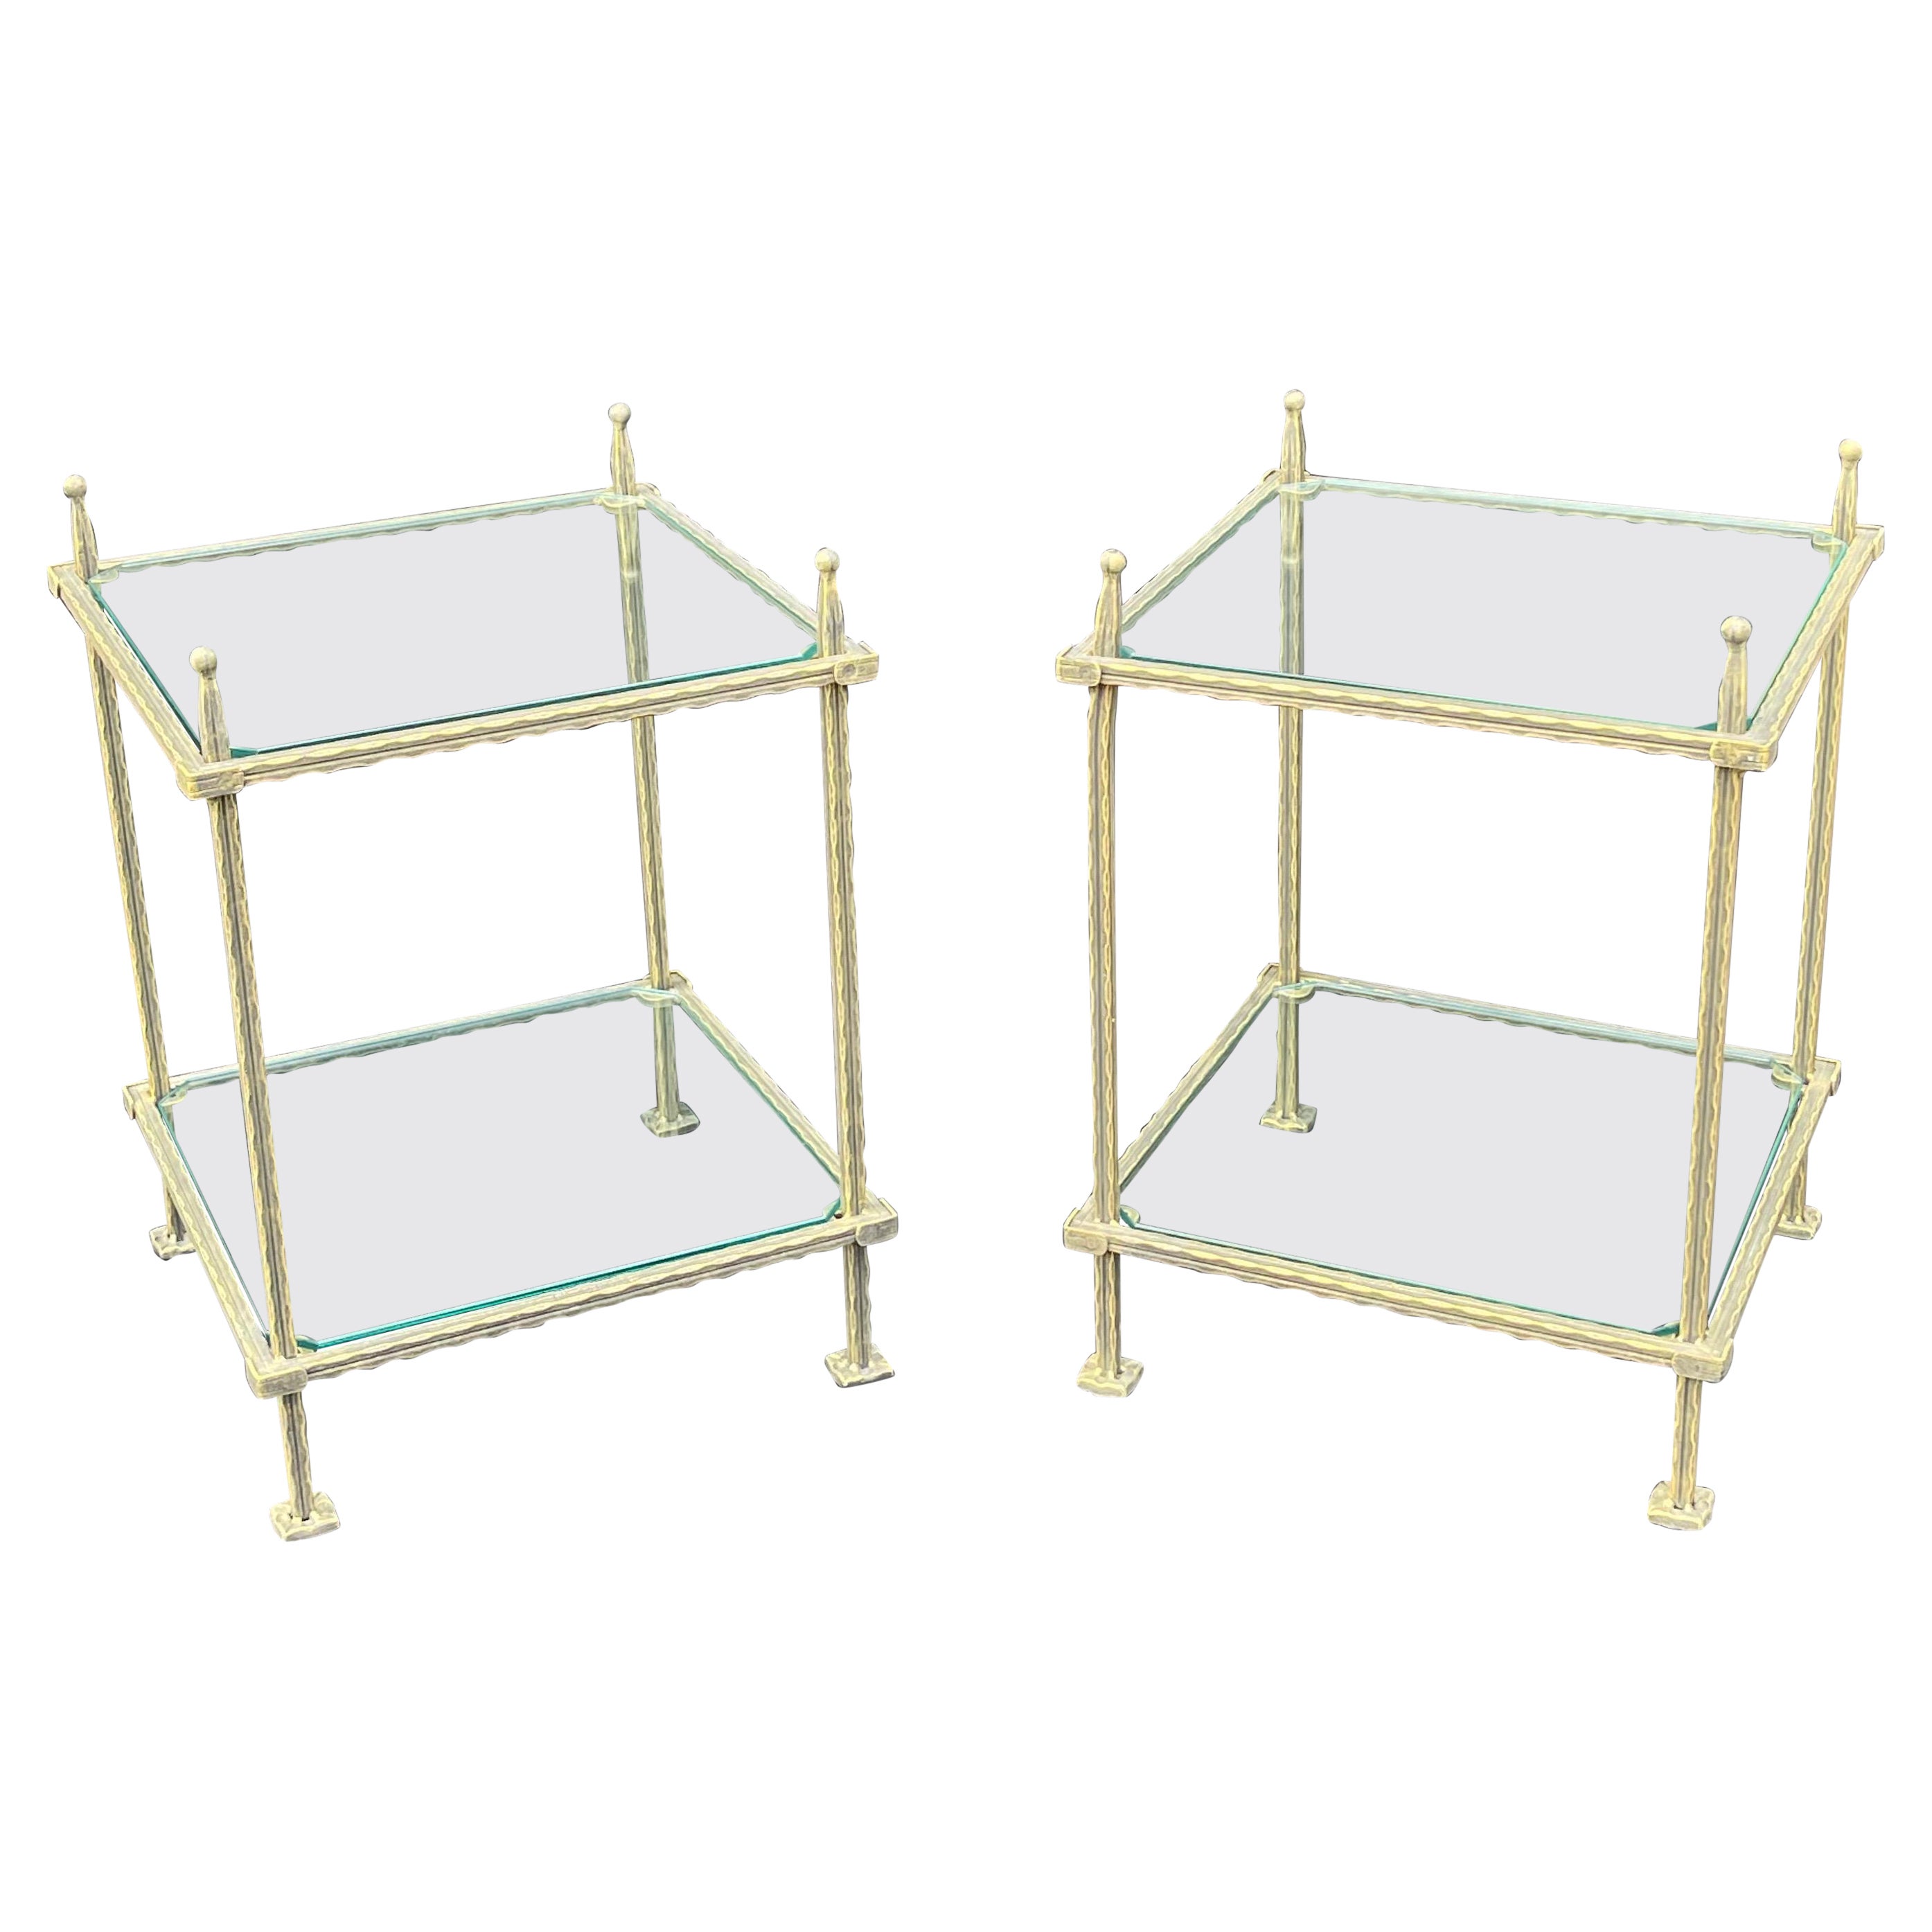 Wonderful Pair Mid Century Bronzed Iron Two-Tiered Glass Tables Claudio Rayes